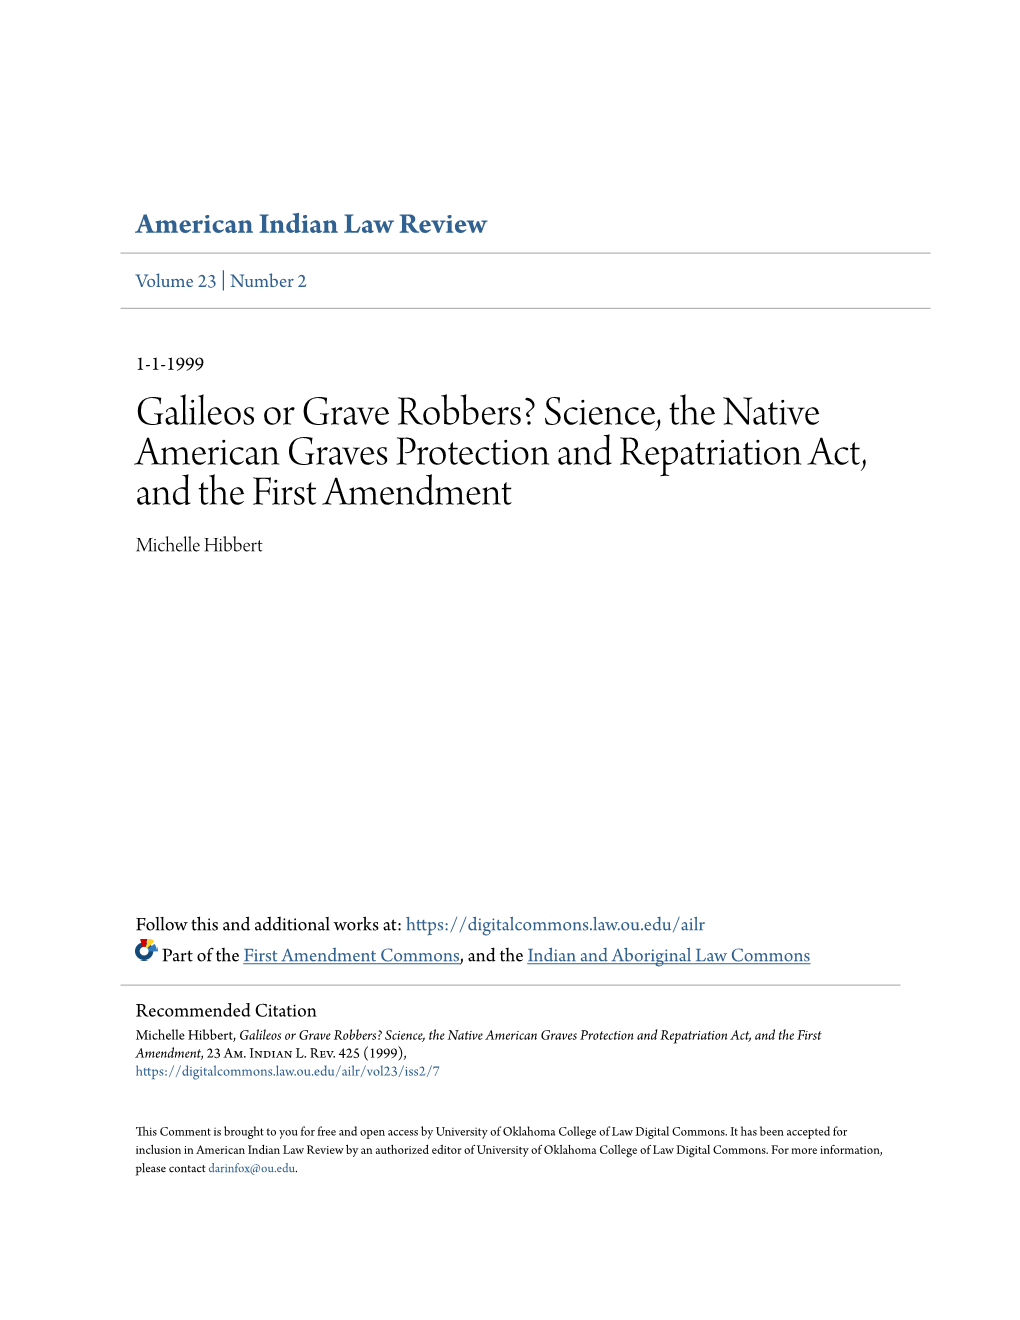 Galileos Or Grave Robbers? Science, the Native American Graves Protection and Repatriation Act, and the First Amendment Michelle Hibbert